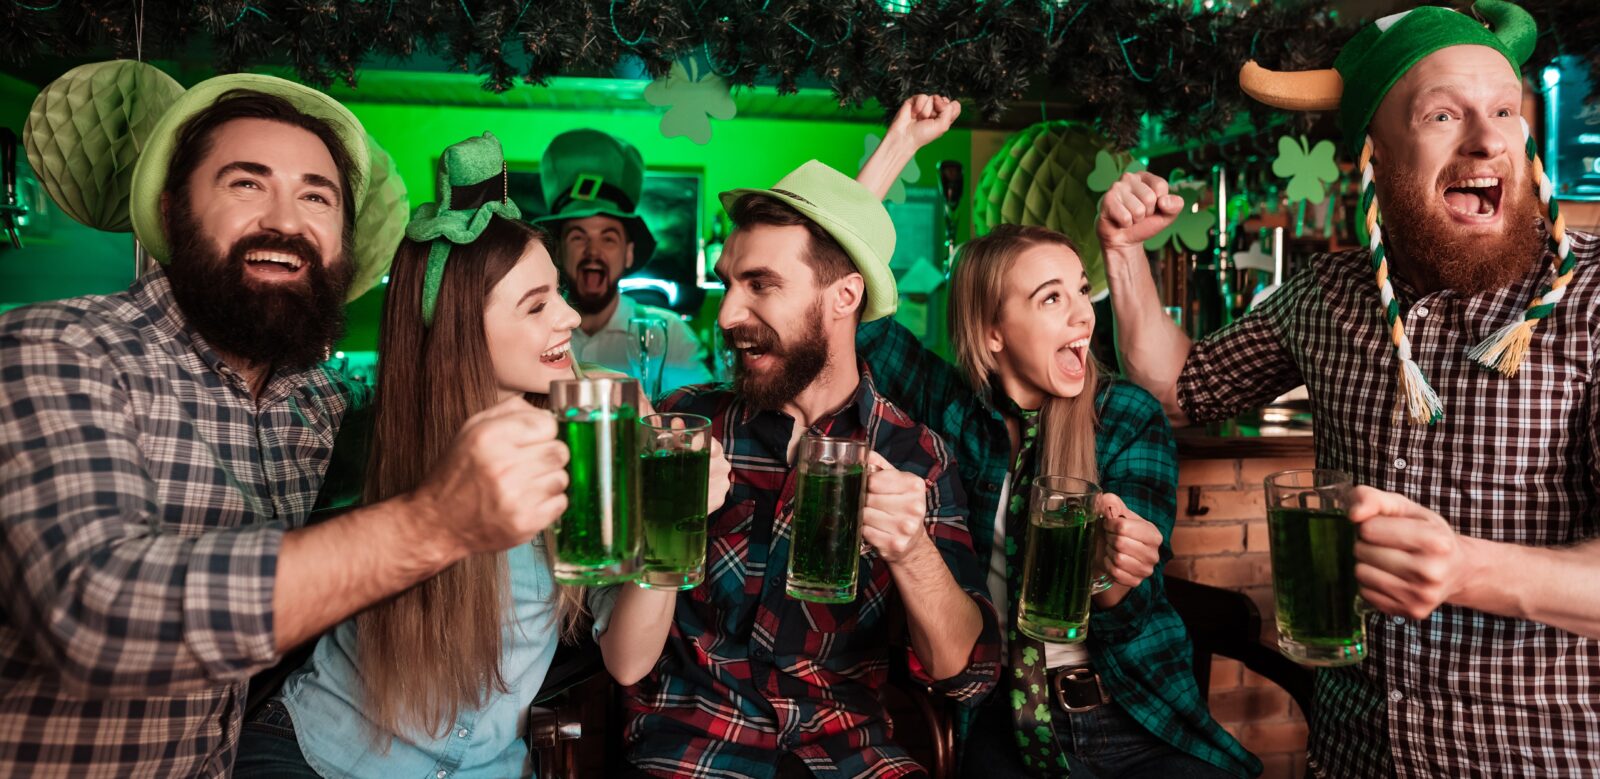 Do The Almost St. Patty’s Day Crawl in Sacramento!